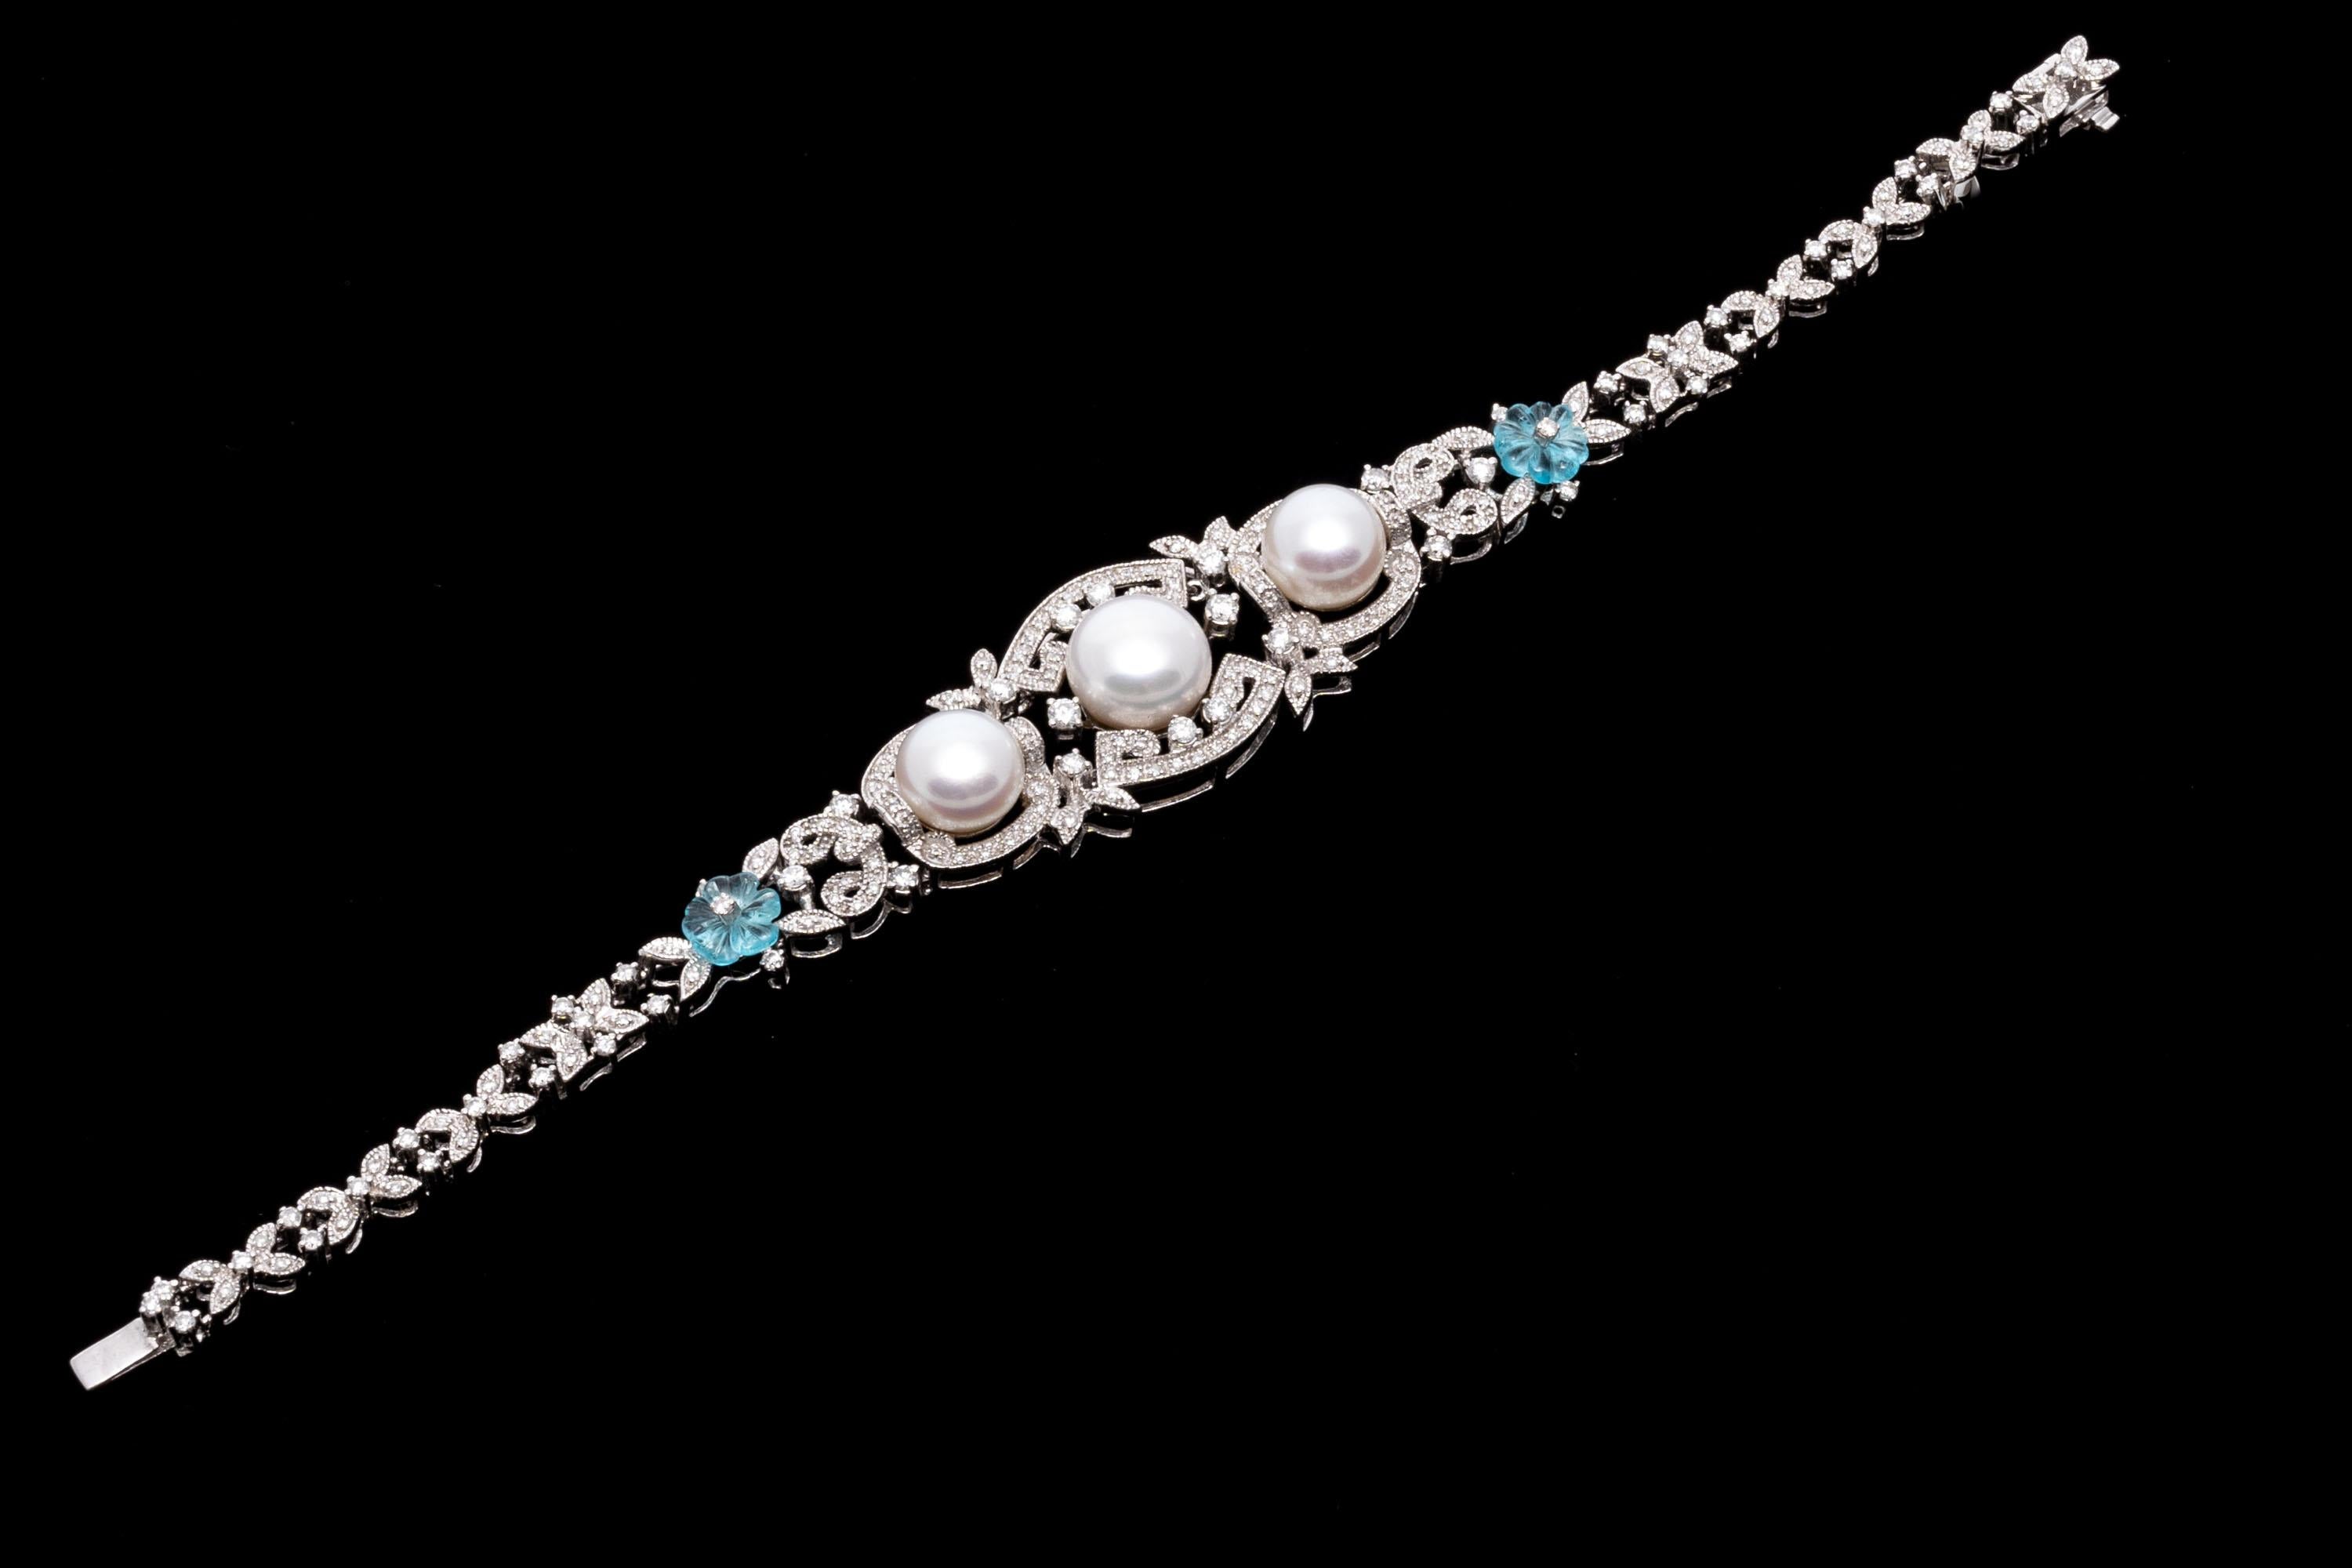 14K White Gold Baroque Revival Pearl and Diamond Bracelet With Blue Topaz Flower For Sale 4